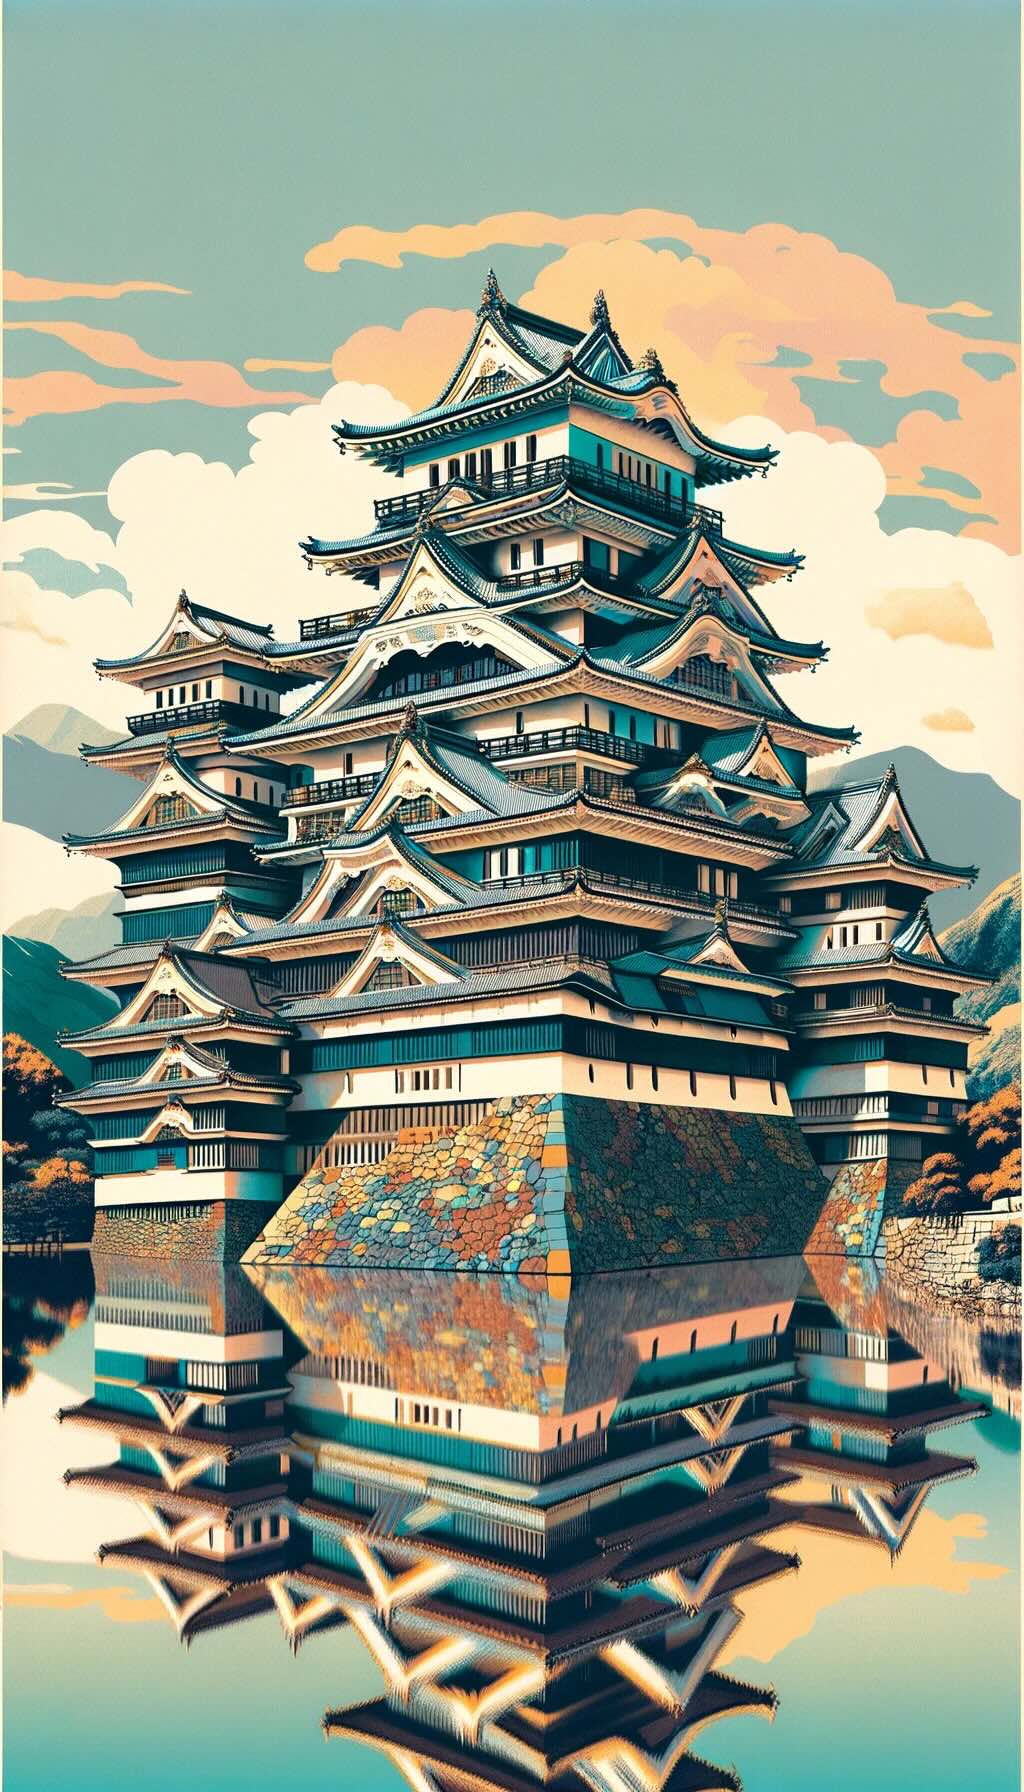 Japanese castle reflecting its architectural brilliance with multi-tiered pagoda-like towers, intricate carvings, and expansive moats, set against a serene landscape. The style captures the essence of ancient Japan, blending historical architecture with modern artistic expression